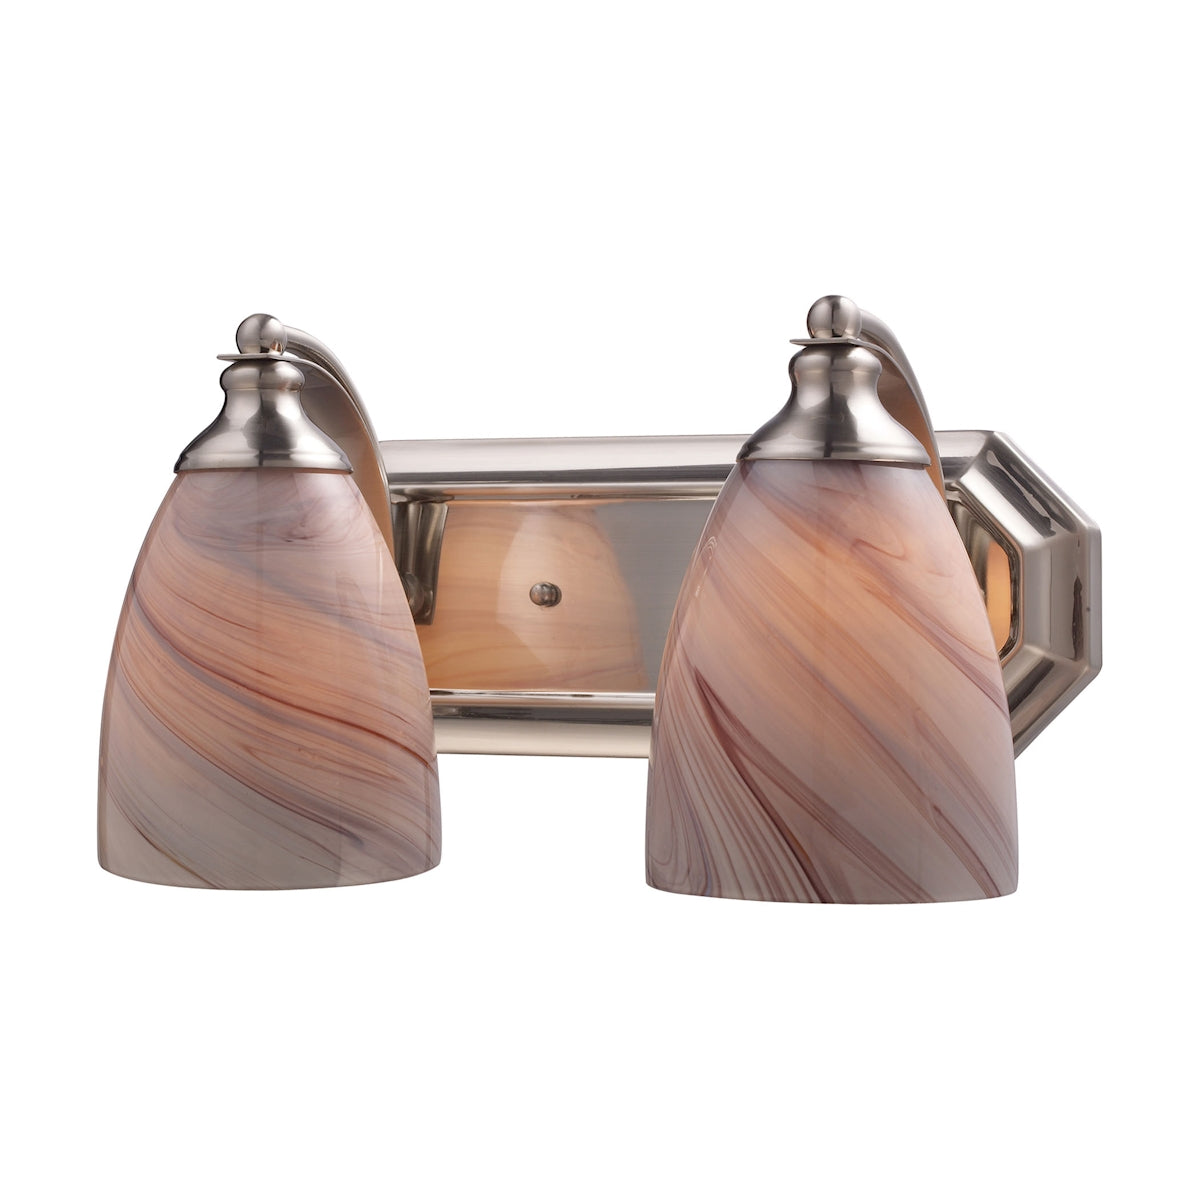 Mix-N-Match Vanity 2-Light Wall Lamp in Satin Nickel with Creme Glass